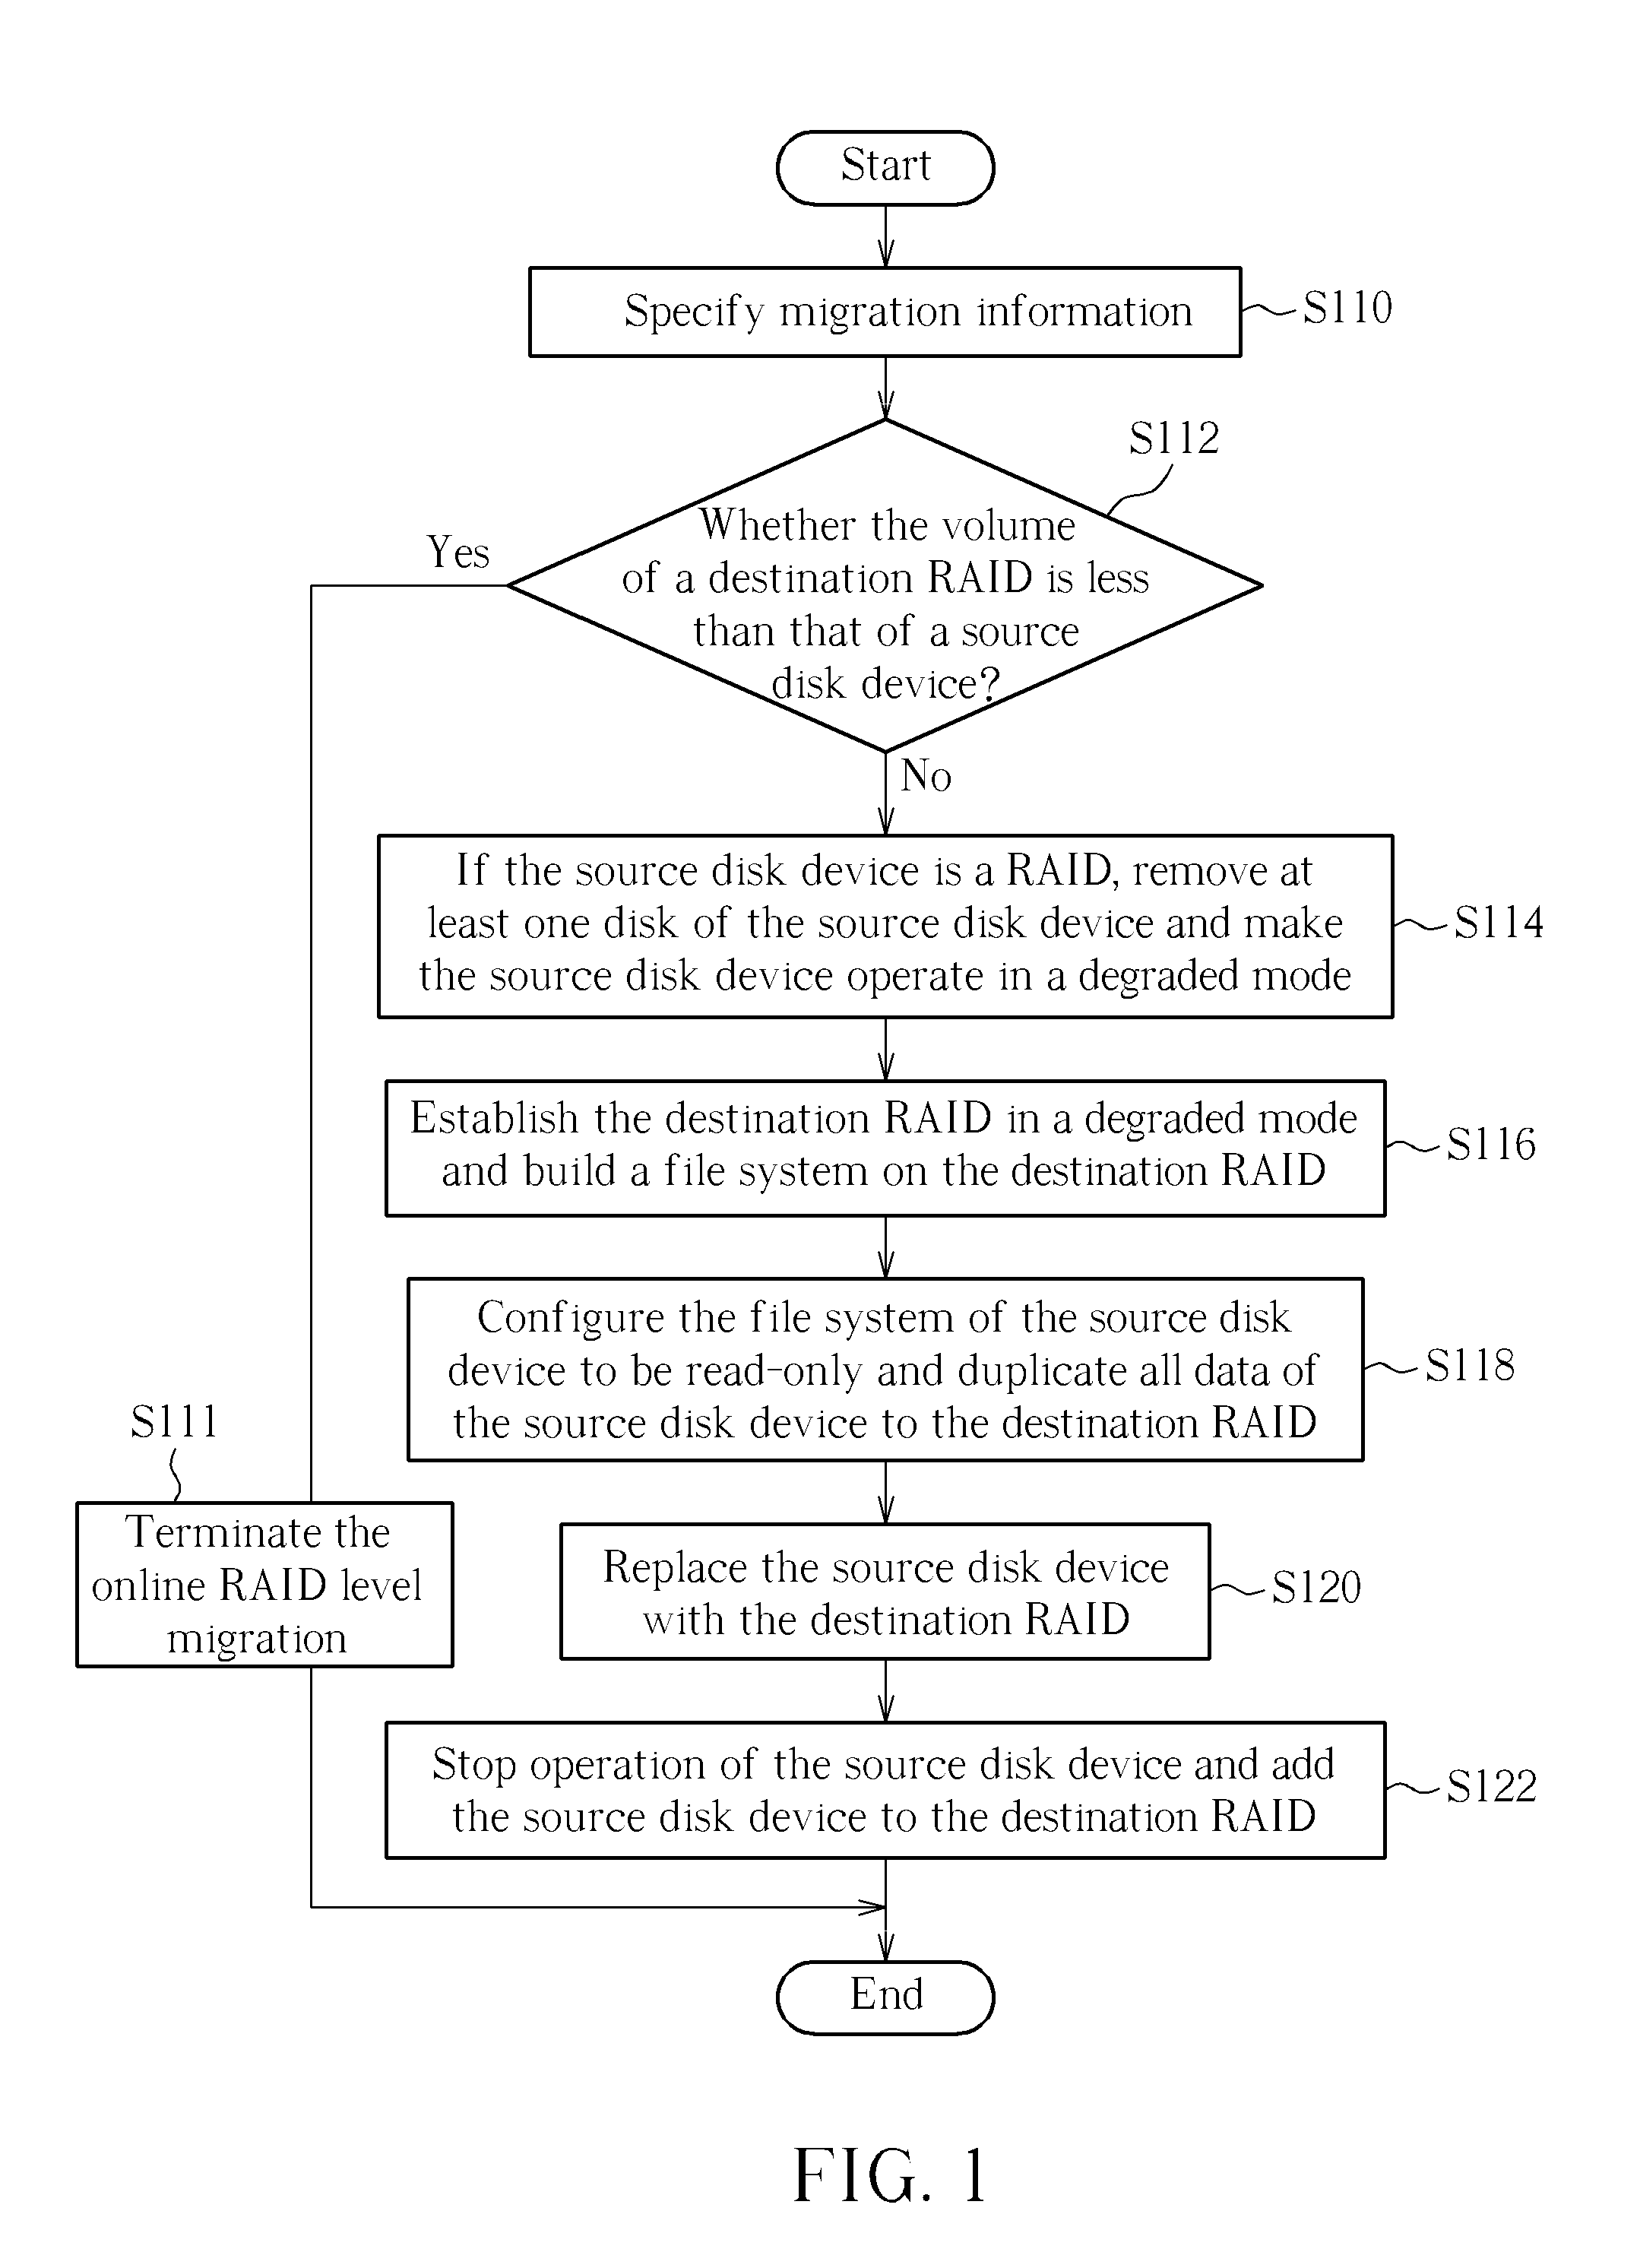 Raid level migration method for performing online raid level migration and adding disk to destination raid, and associated system